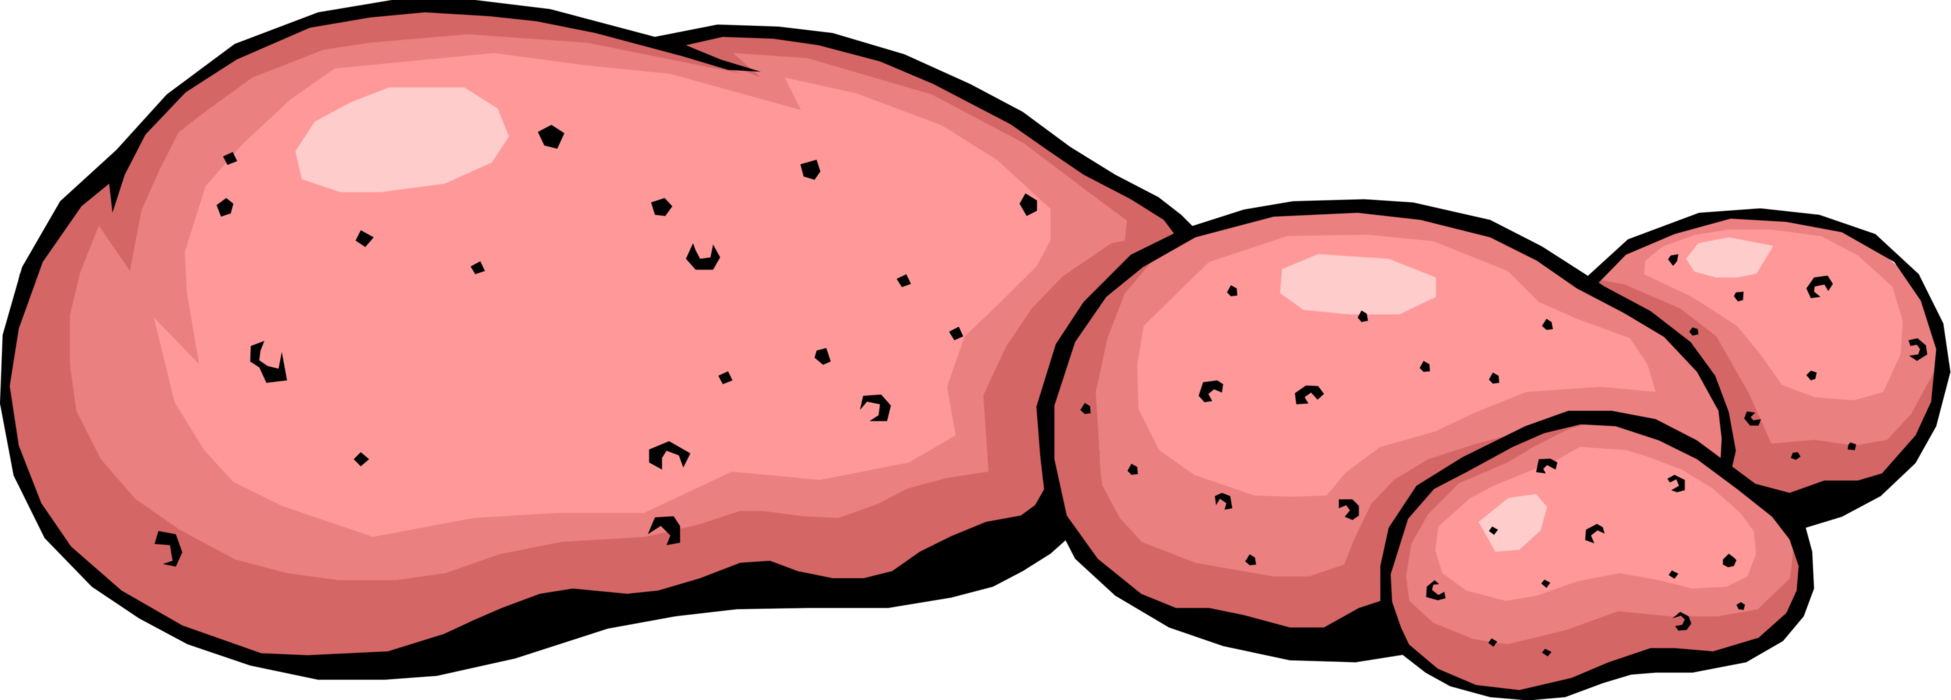 Vector Illustration of Cultivated Starchy Edible Tuber Potato